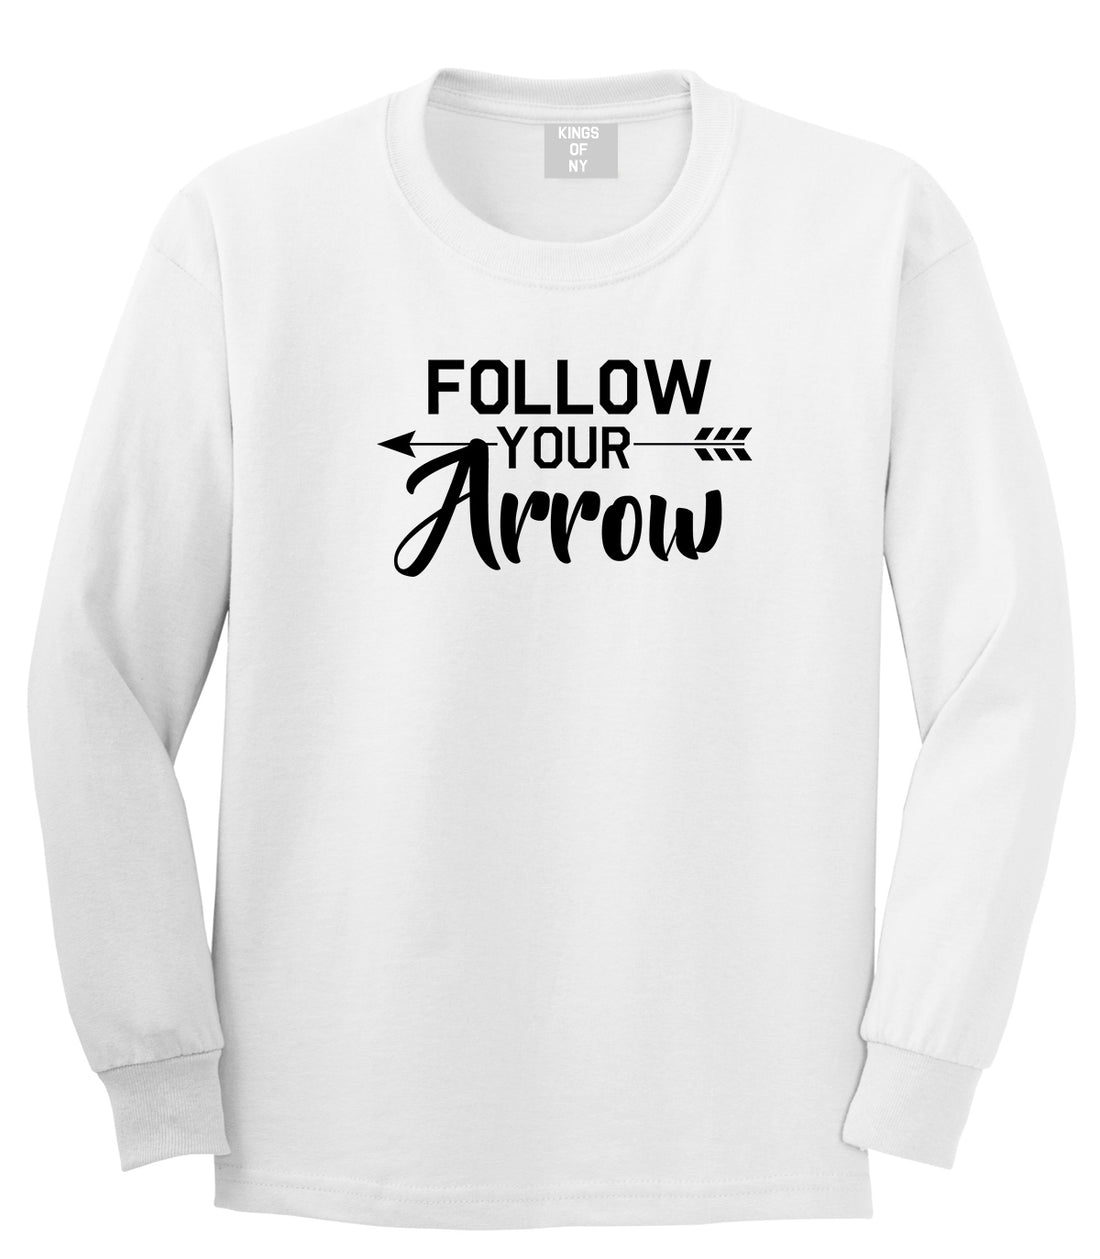 Follow Your Arrow Mens White Long Sleeve T-Shirt by KINGS OF NY